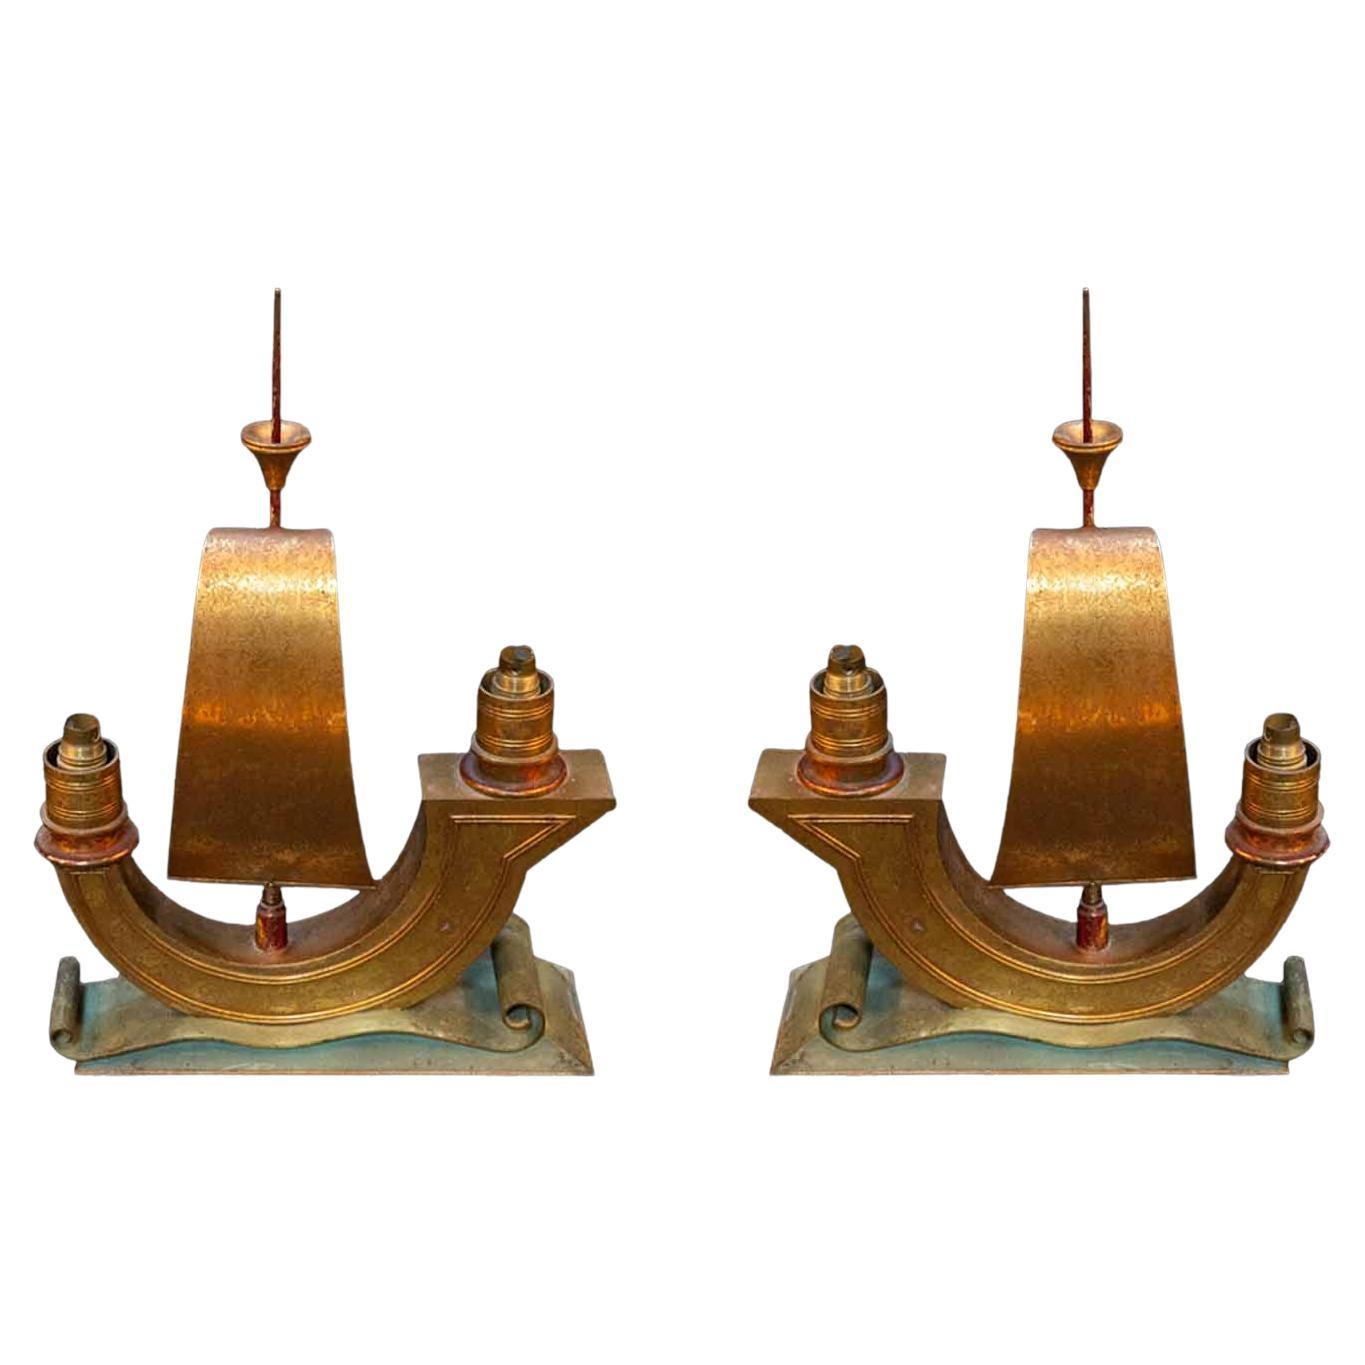 1940's French Bronze Galleon Ship Lamps, Pair For Sale